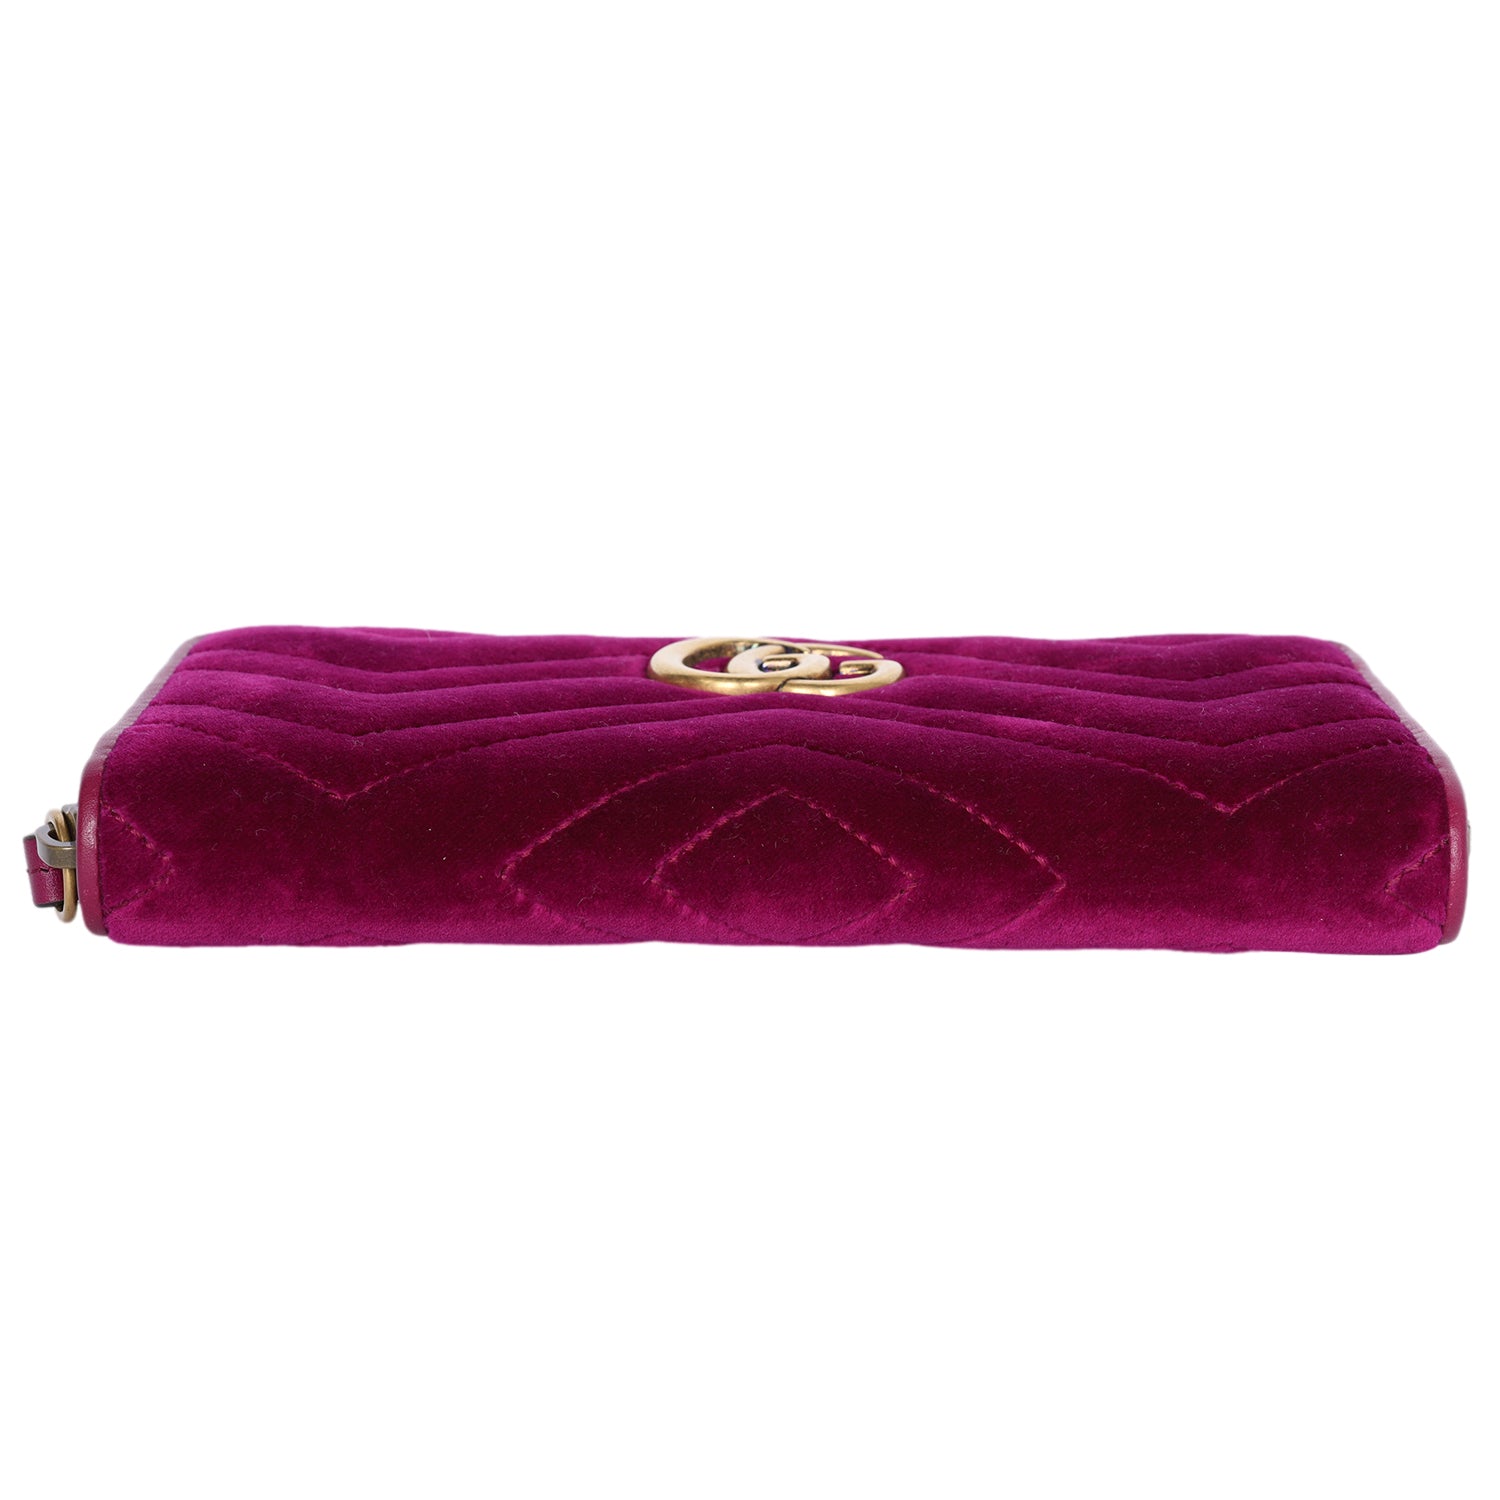 GG Marmont Quilted-Velvet Wallet in Purple (Authentic Pre-Owned)